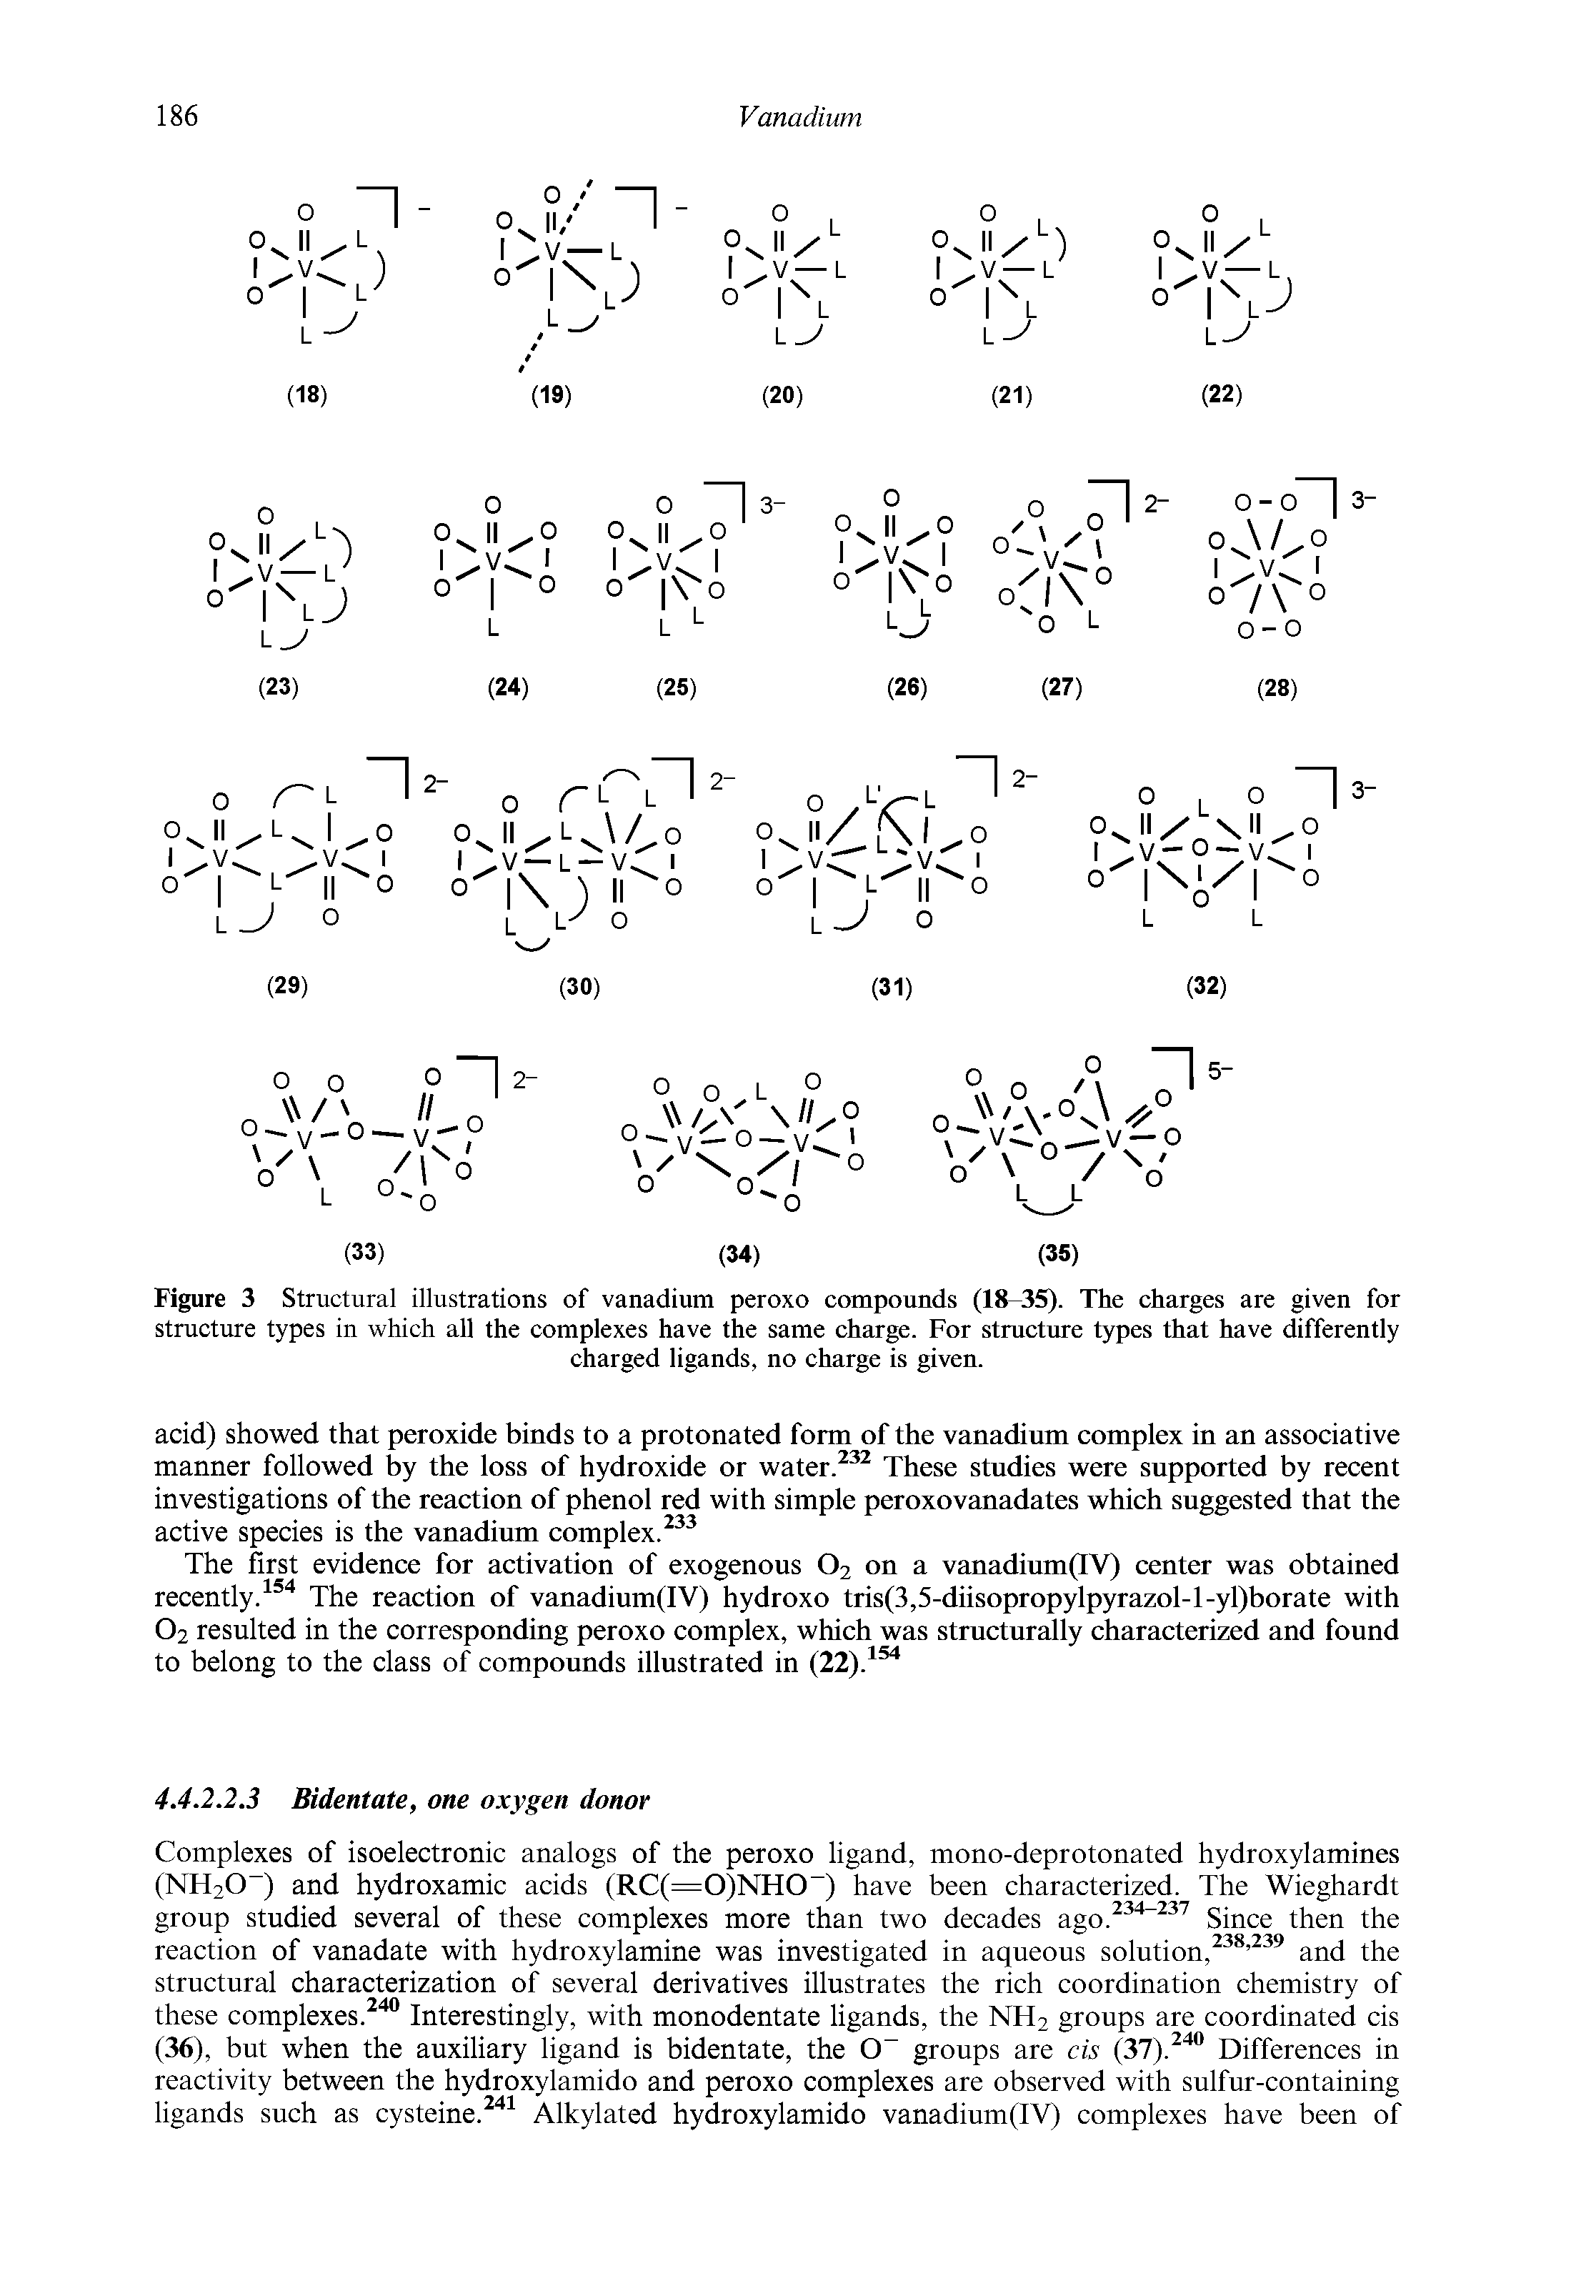 Figure 3 Structural illustrations of vanadium peroxo compounds (18-35). The charges are given for structure types in which all the complexes have the same charge. For structure types that have differently...